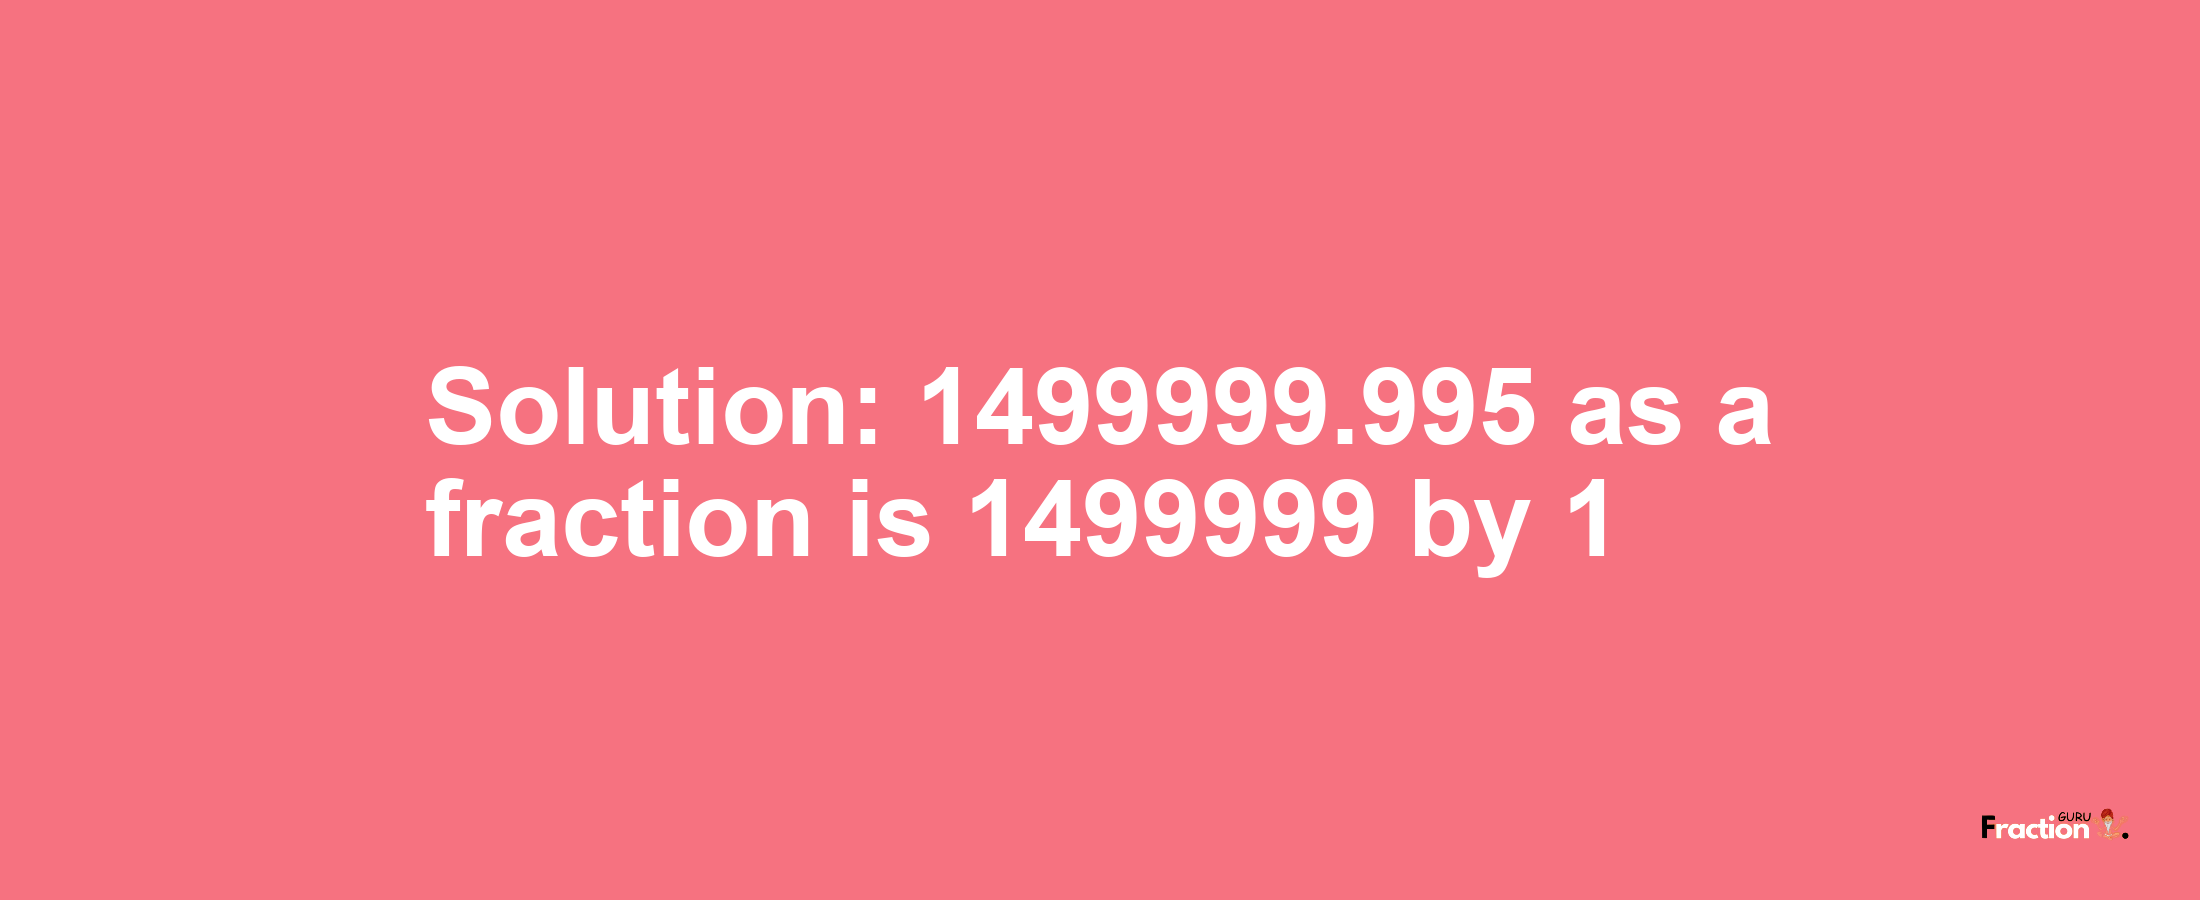 Solution:1499999.995 as a fraction is 1499999/1